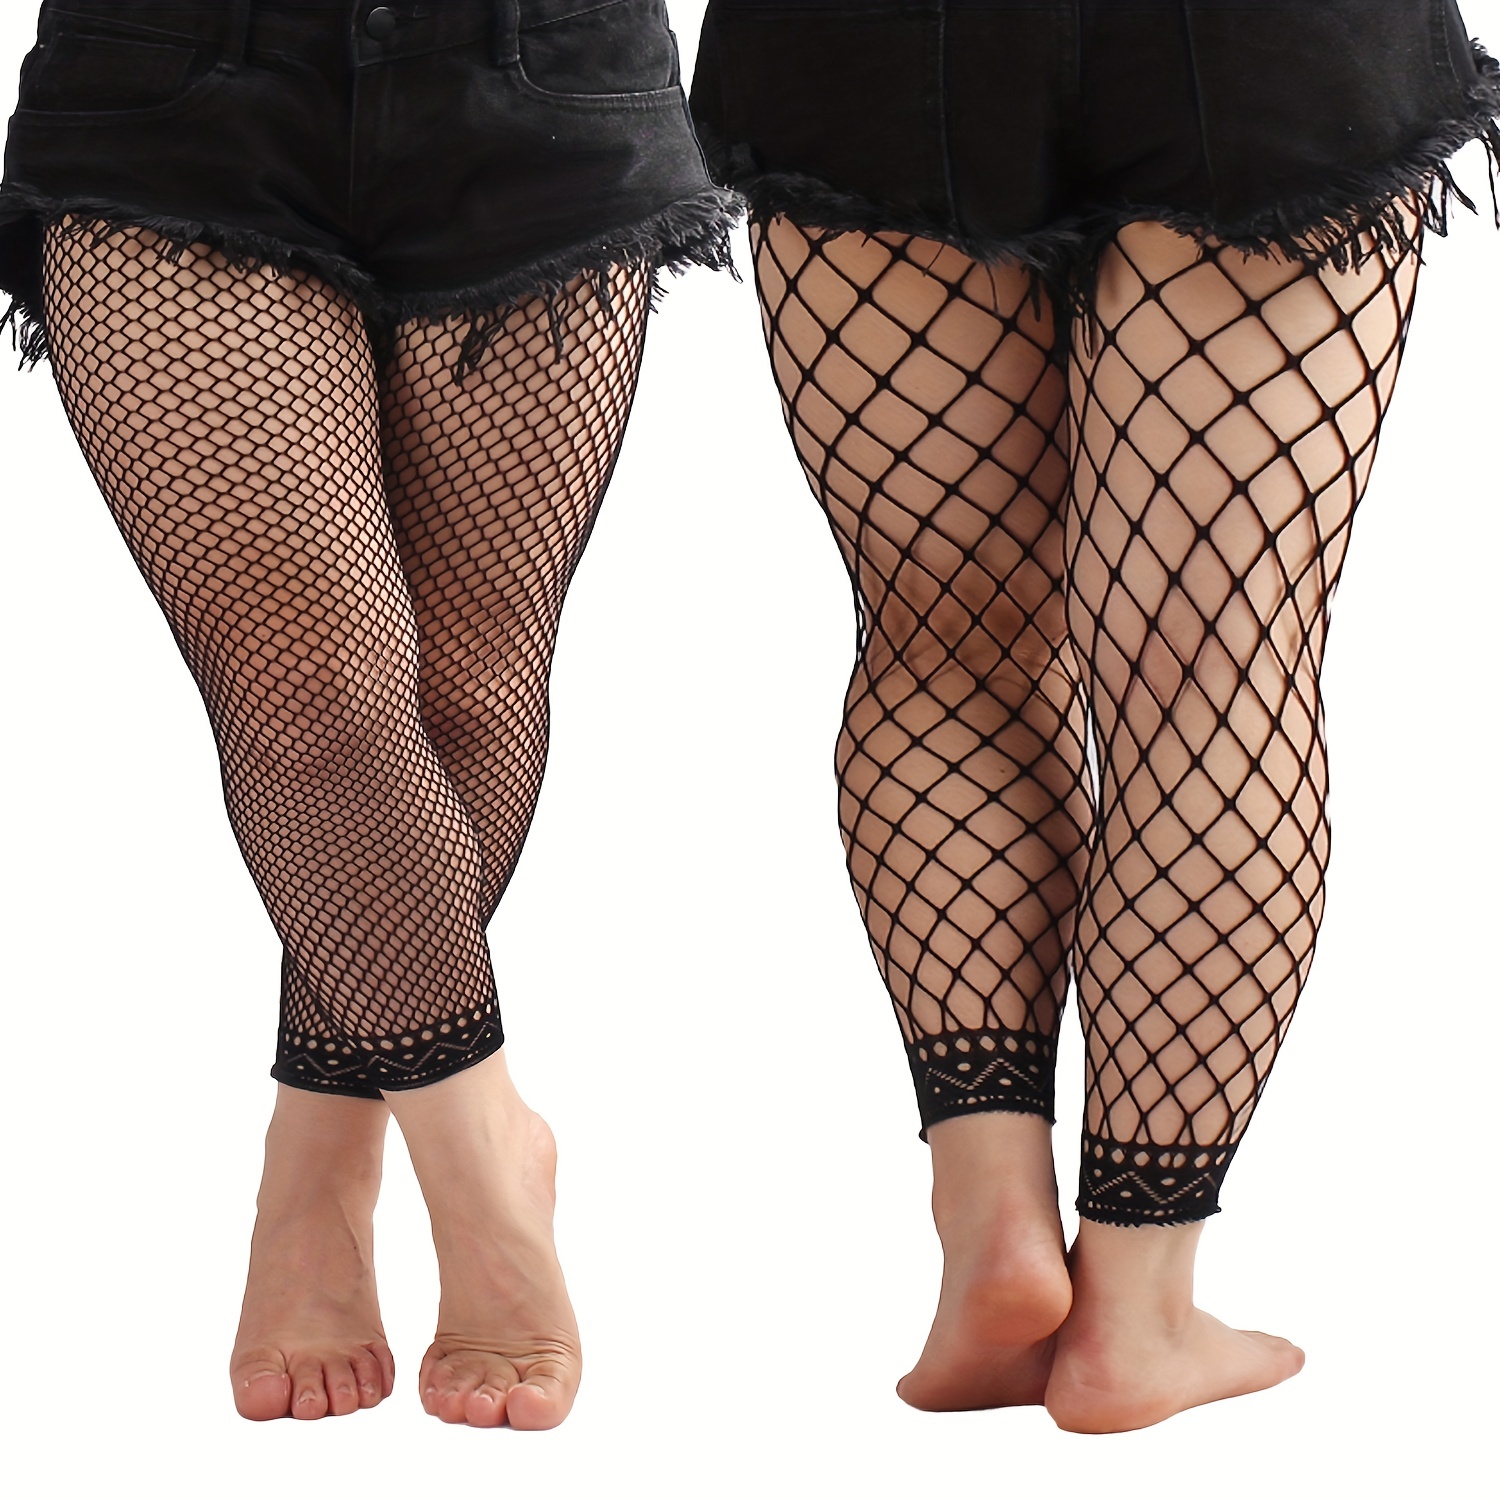 Sexy Women High Waist Fishnet Stretchy Tights Footless Pantyhose Stockings  Pants